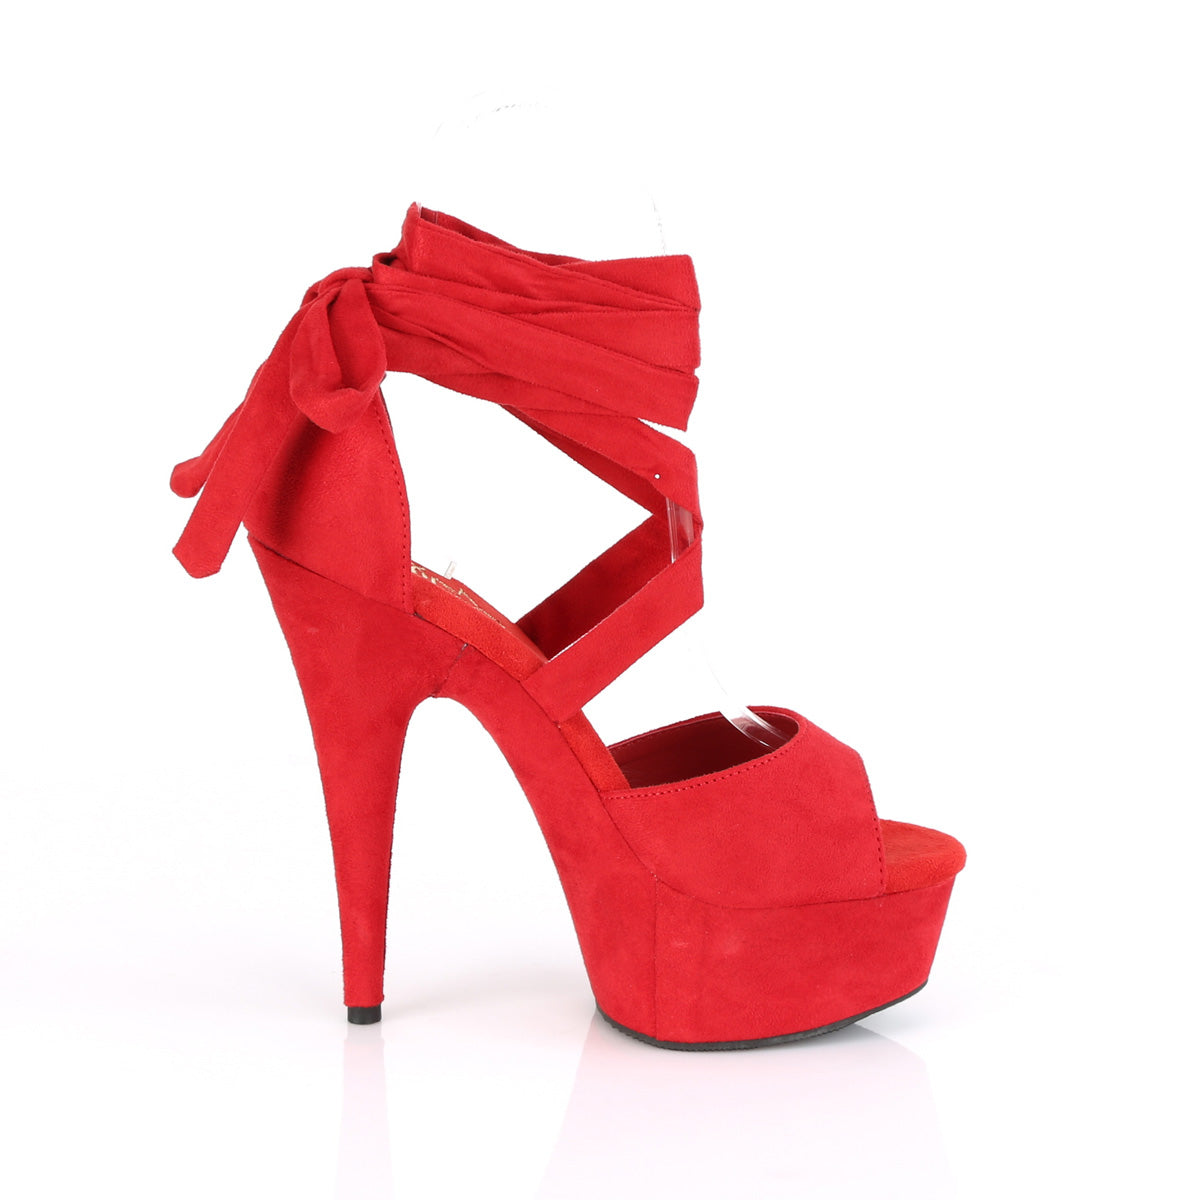 Pleaser Sandalias para mujer DELIGHT-679 Gamuza Red Faux / Red Faux Suede